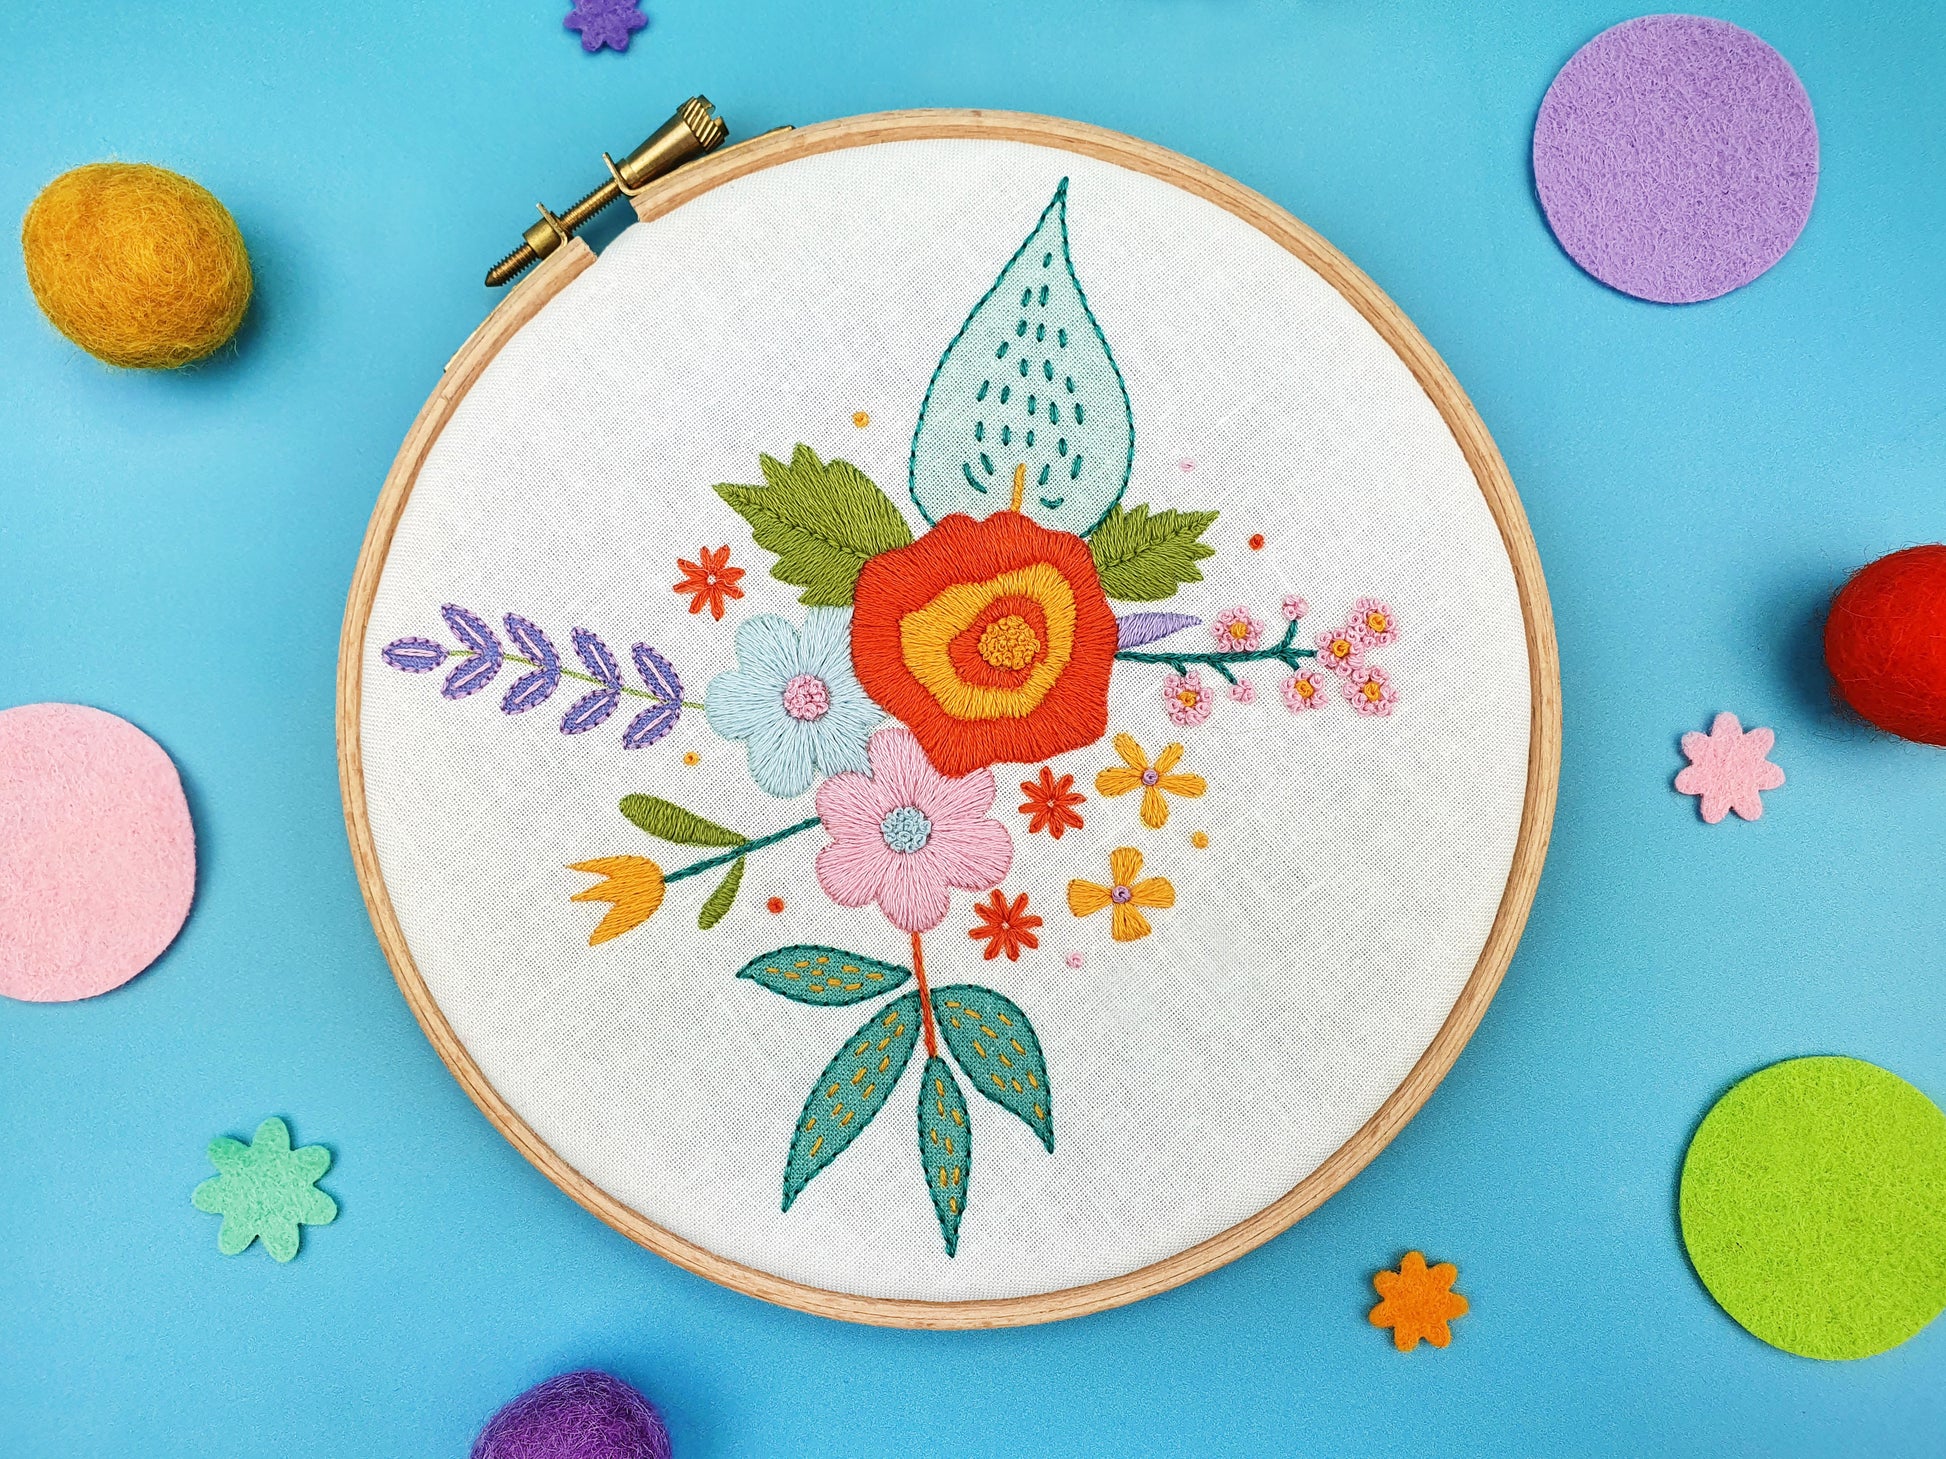 Spring Floral Bloom Embroidery Kit - Embroidery Kits - ohsewbootiful